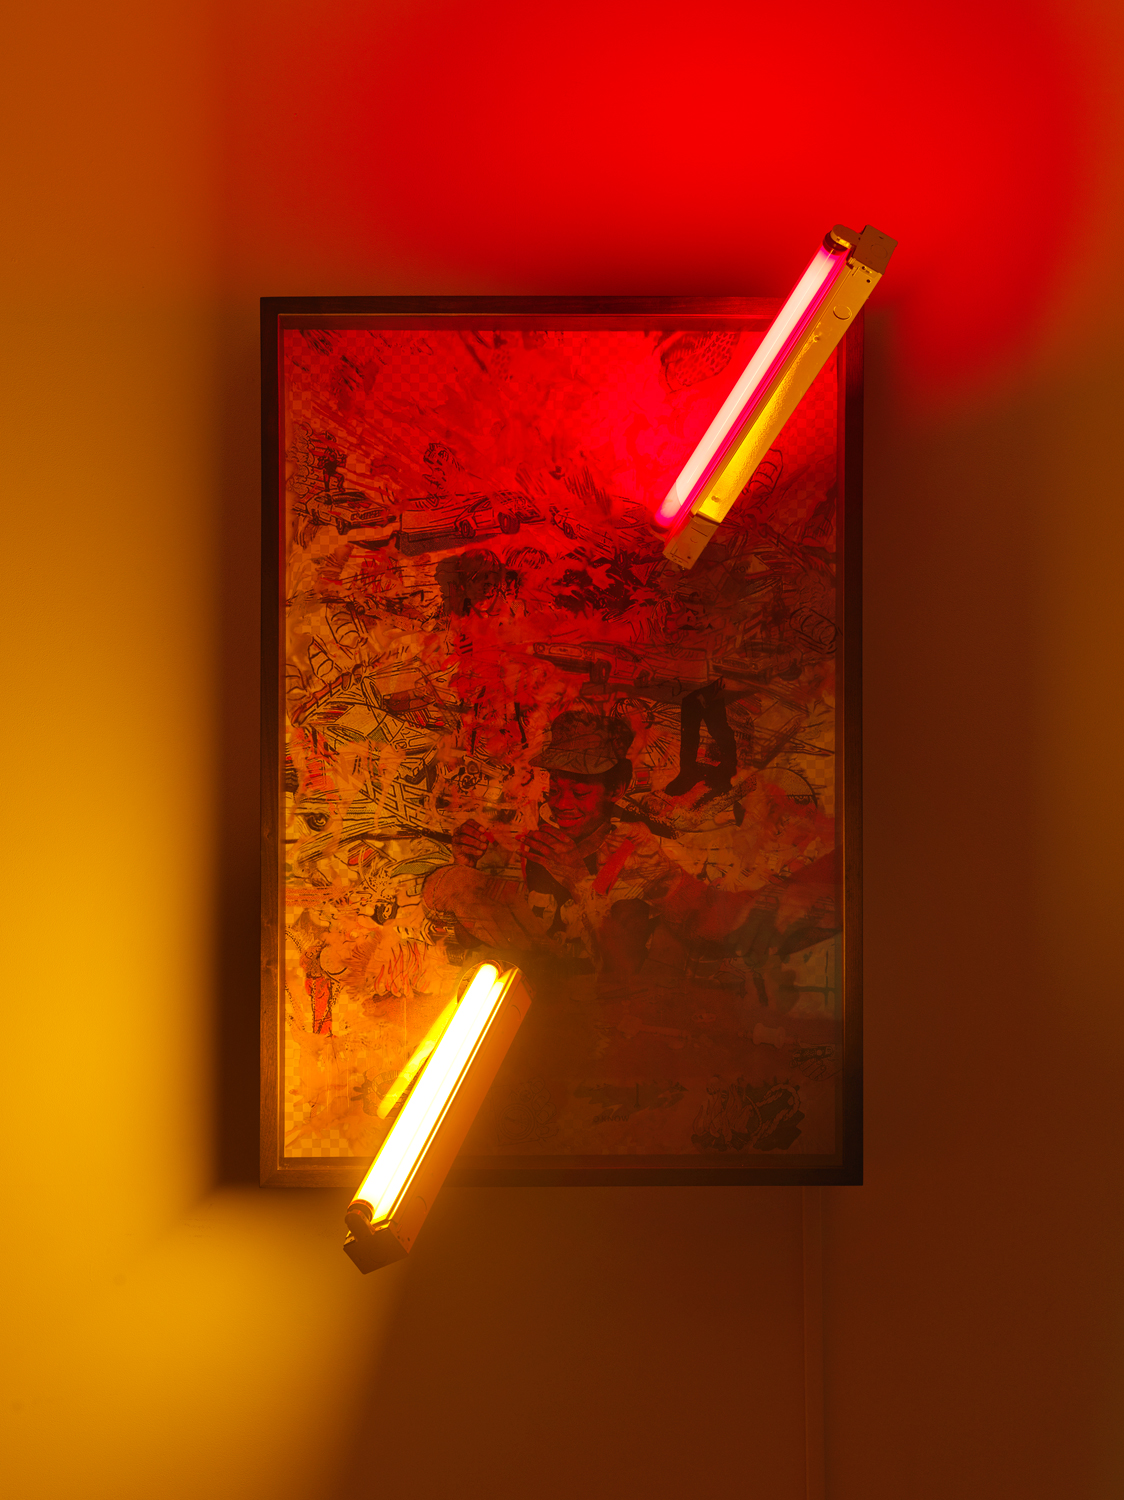 Jibade-Khalil Huffman, Untitled (Proof), 2020, Transparencies in lightbox, fluorescent fixtures, fluorescent tubes with color tinting, 50.75h x 31.34w x 26.5d in.